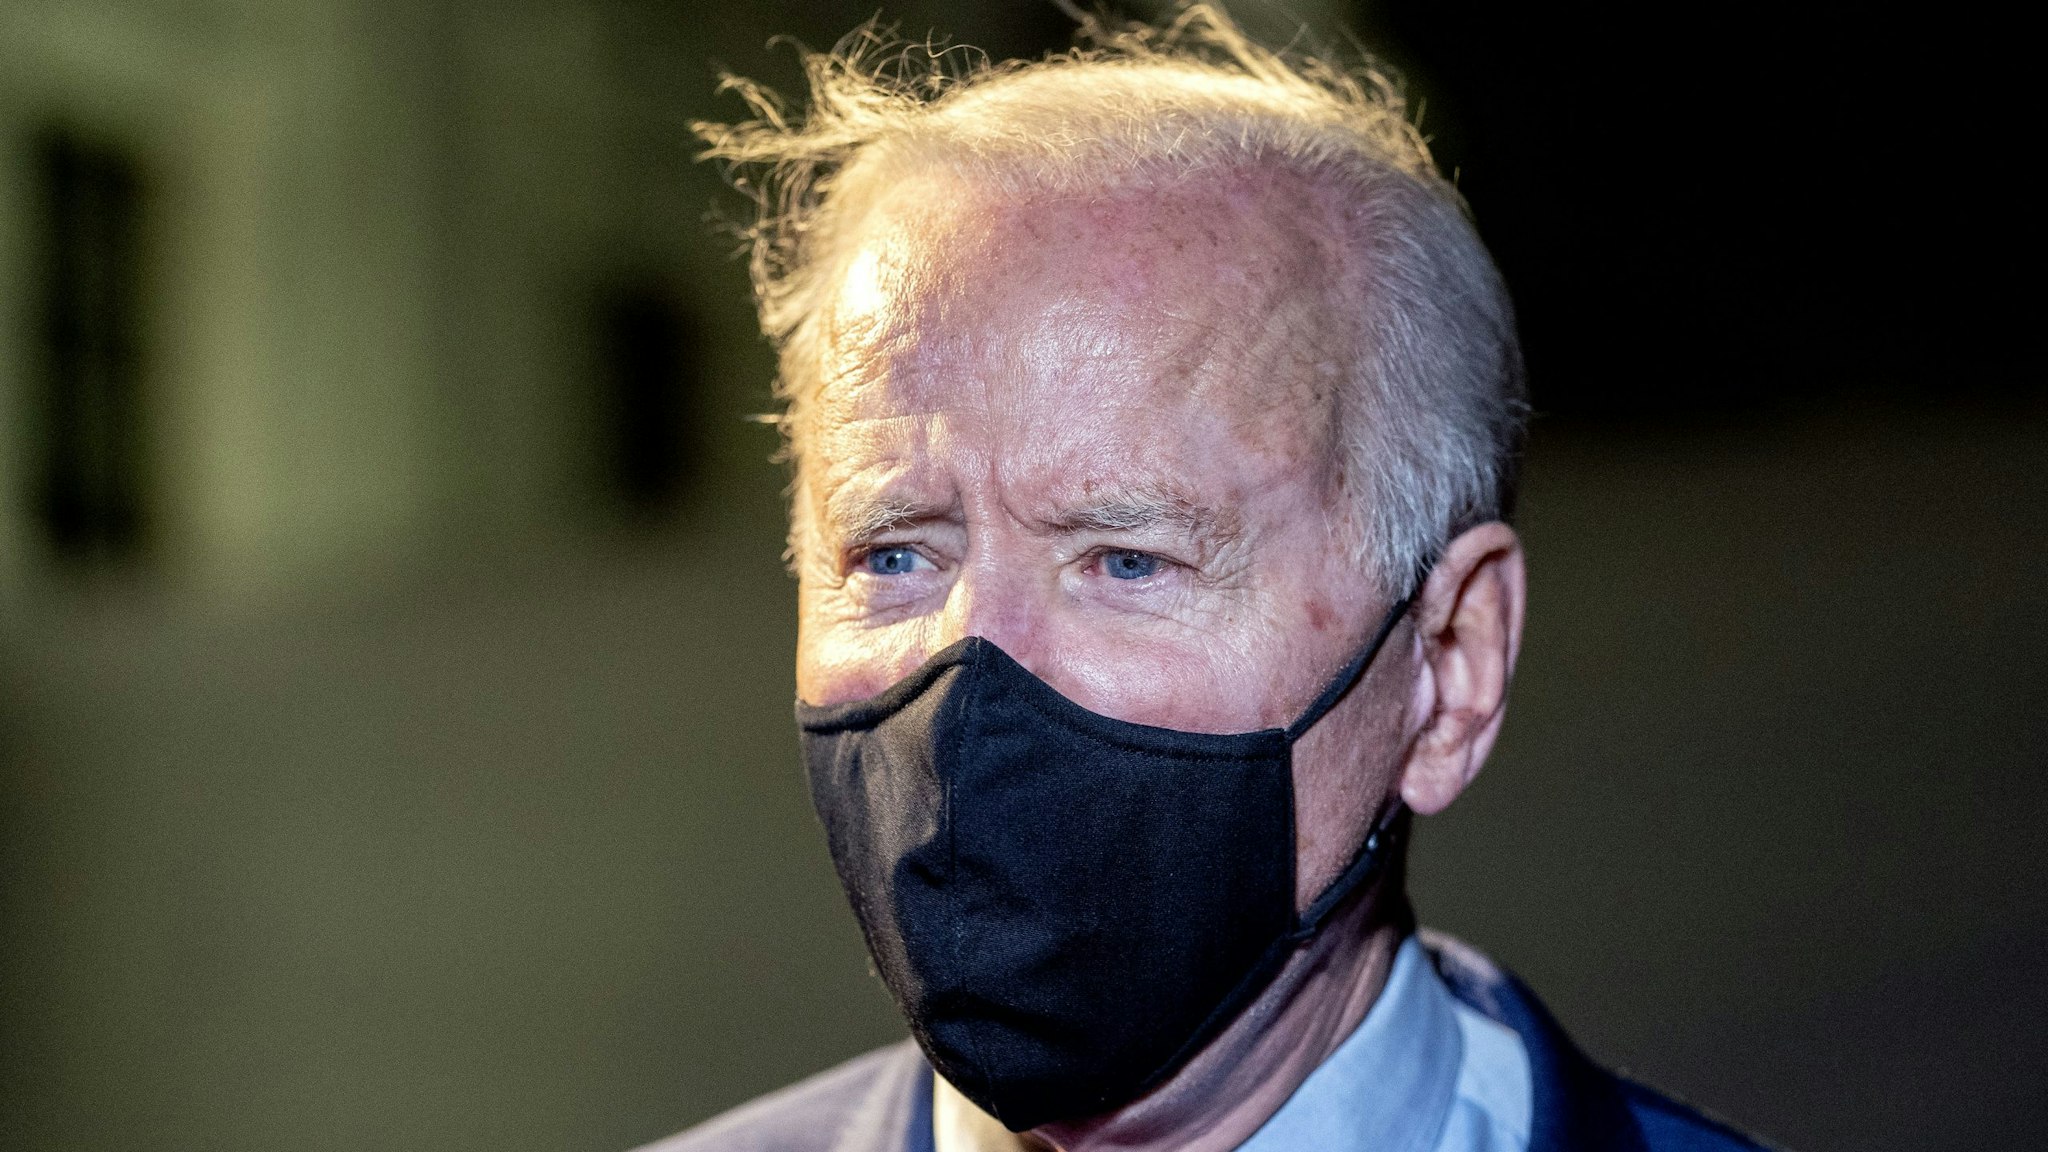 U.S. President Joe Biden wears a protective mask while speaking to members of the media on the South Lawn of the White House after arriving on Marine One in Washington, D.C., U.S., on Tuesday, March 23, 2021. Biden traveled to Ohio to promote his $1.9 trillion stimulus, as Democrats take aim at a Senate seat that will be open in next year's midterm elections.